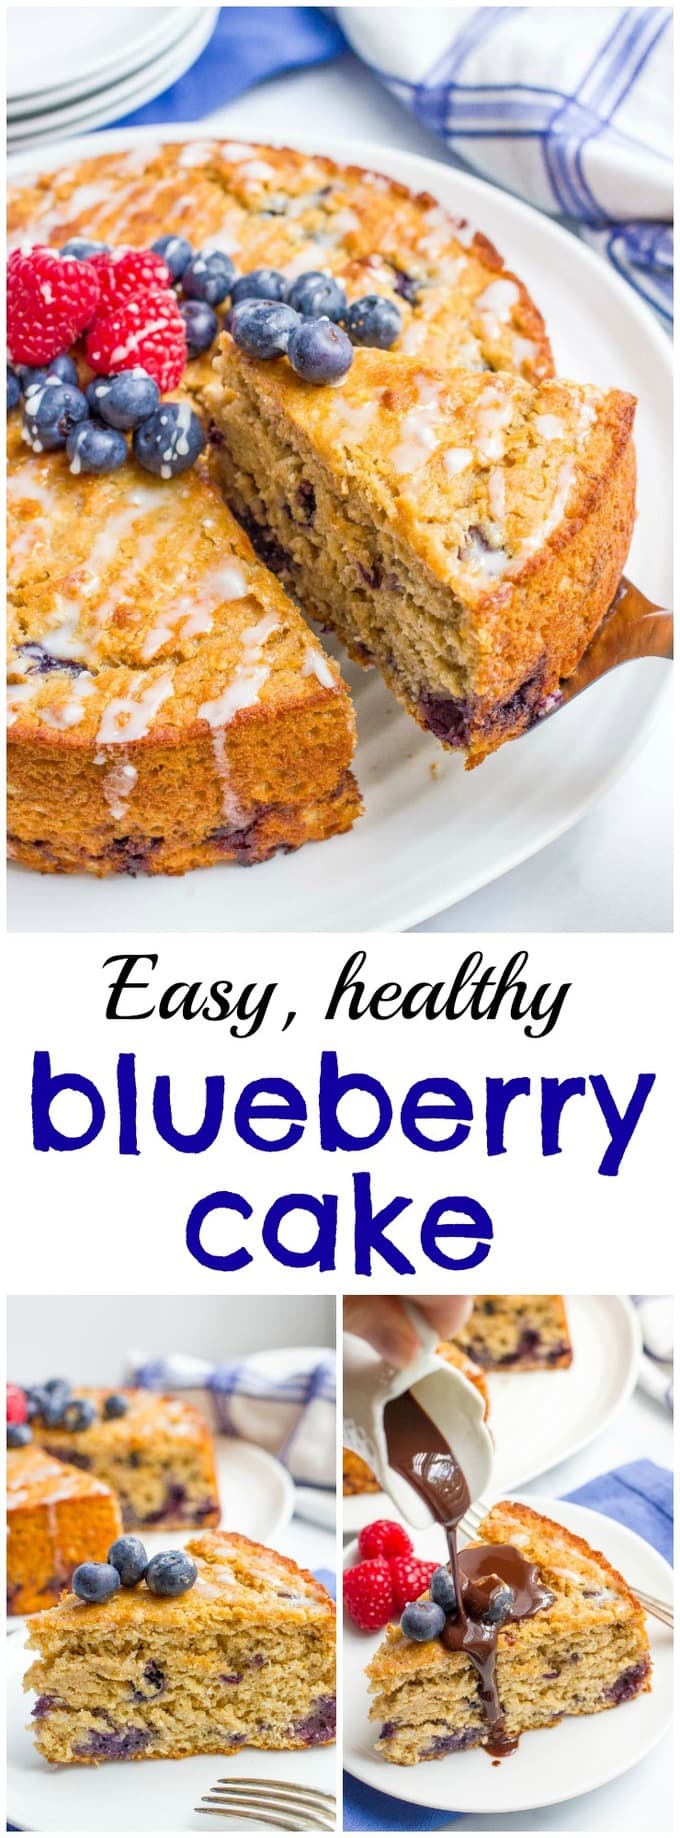 Blueberry cake with an easy lemon glaze - a healthy whole grain dessert recipe with no butter or oil!